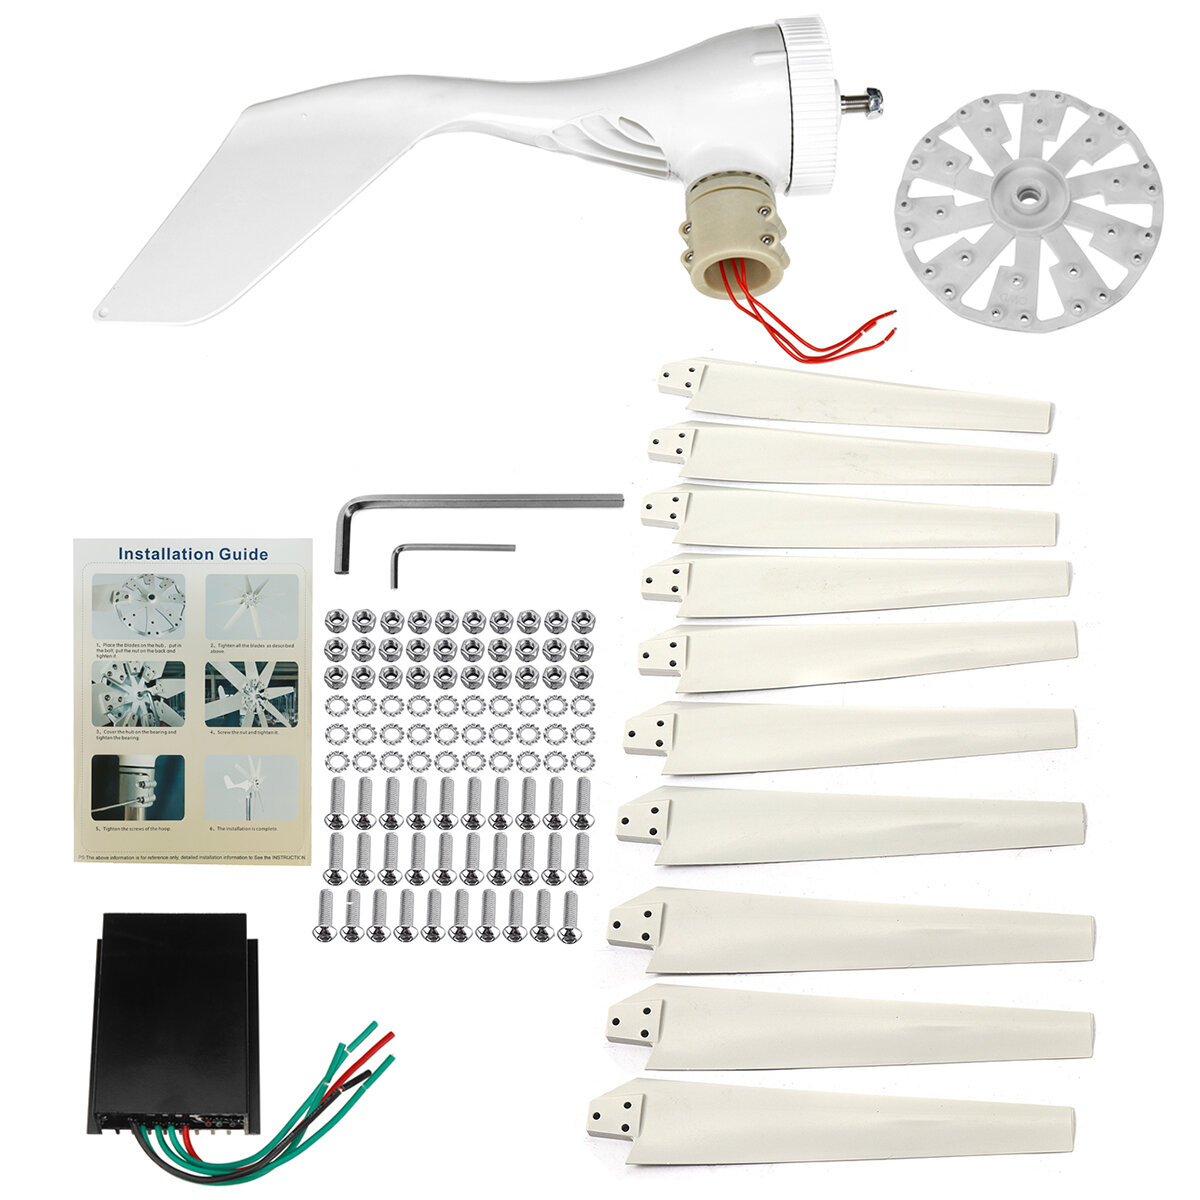 Image of 300W Wind Turbines Generator 10 Blades 12V/24V Wind Controller Turbine Generator kit for Home/Camping